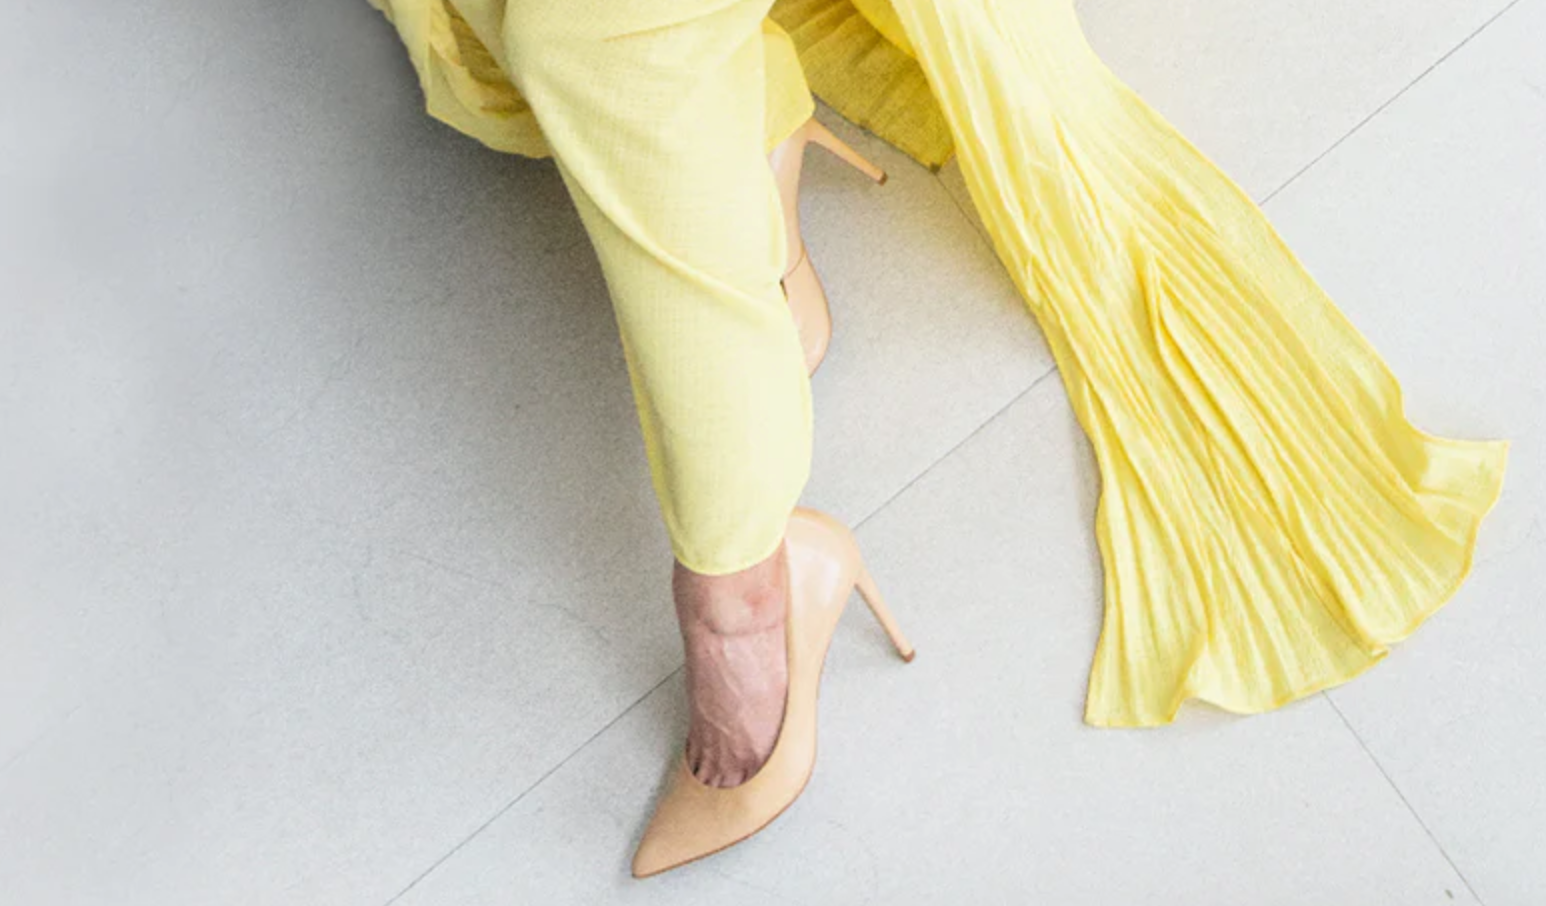 What Shoes To Wear With Wide Leg Pants: 5 Options